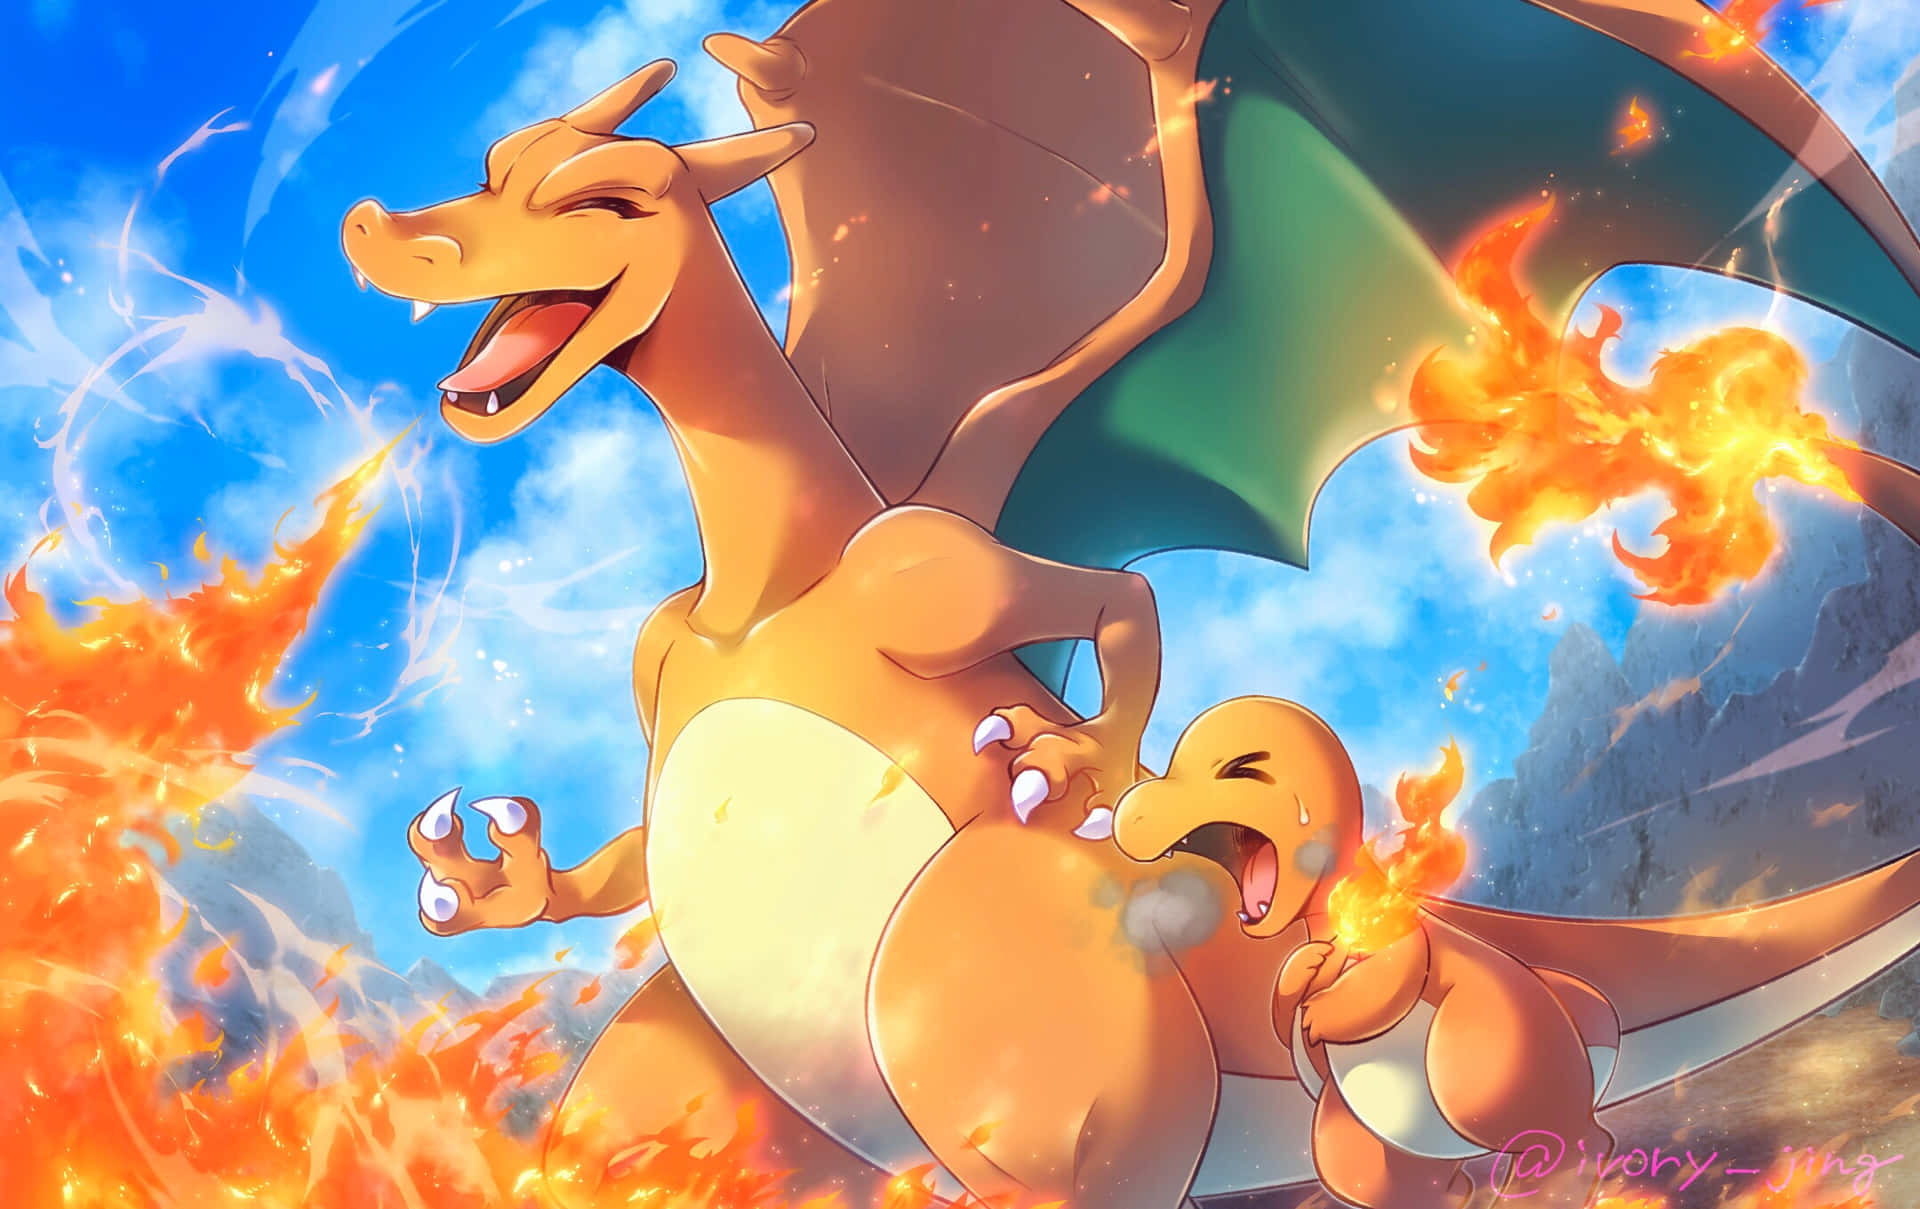 "Don't be fooled by its cute look - Cute Charmander is the perfect pocket monster!" Wallpaper